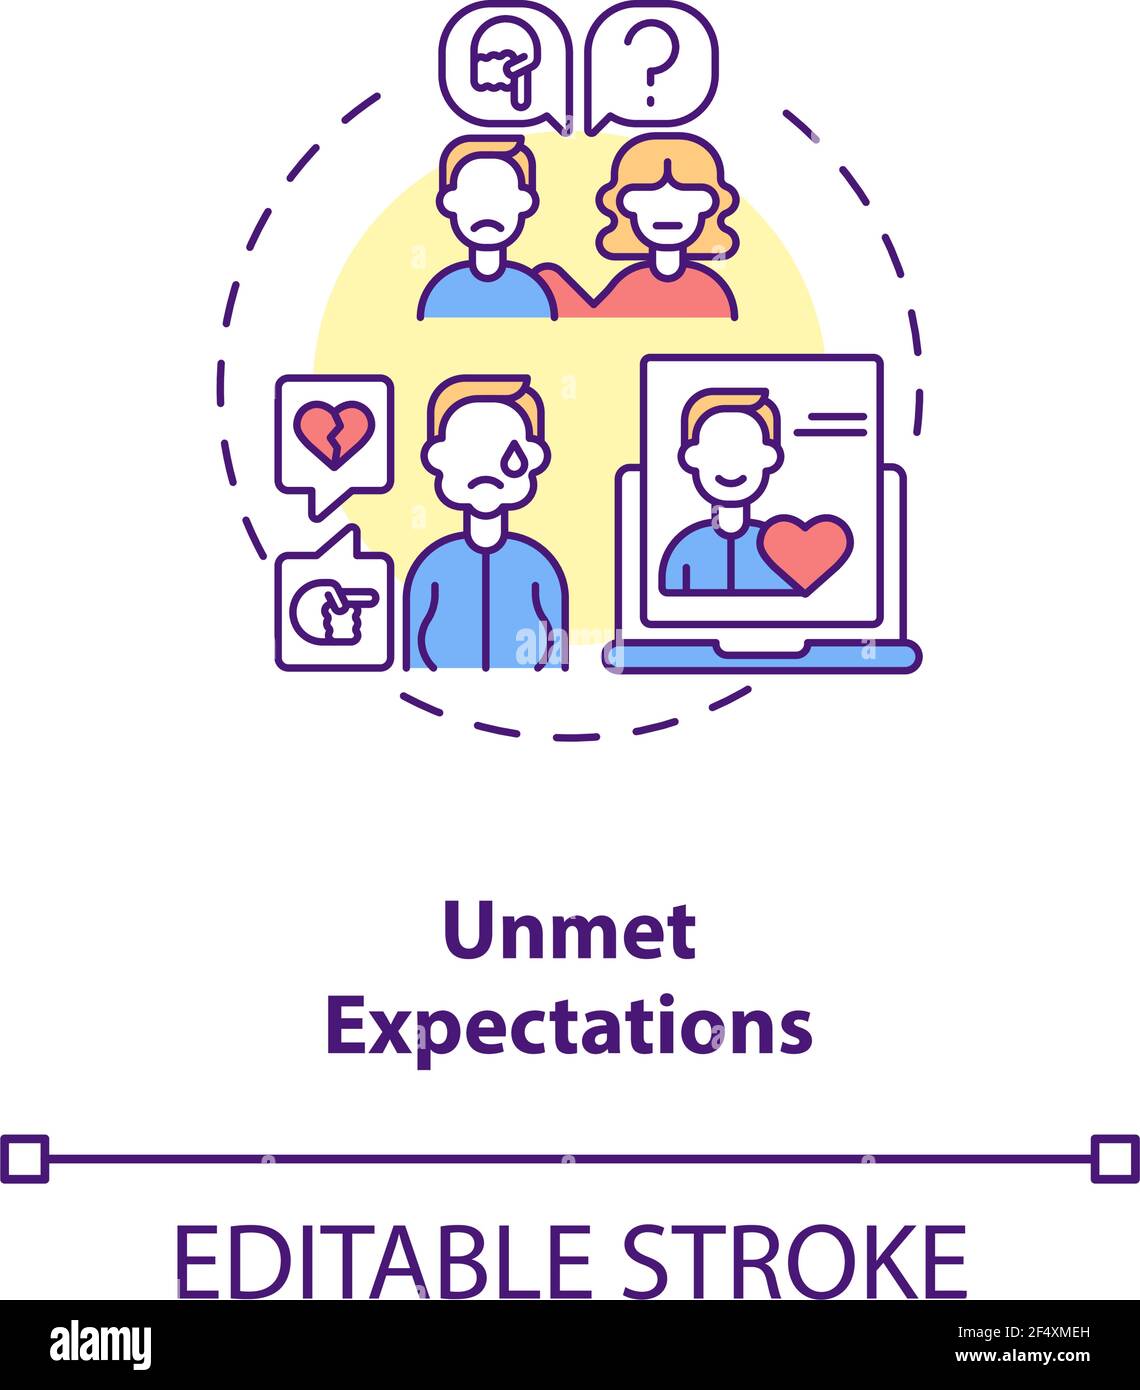 Unmet expectations concept icon. Stock Vector